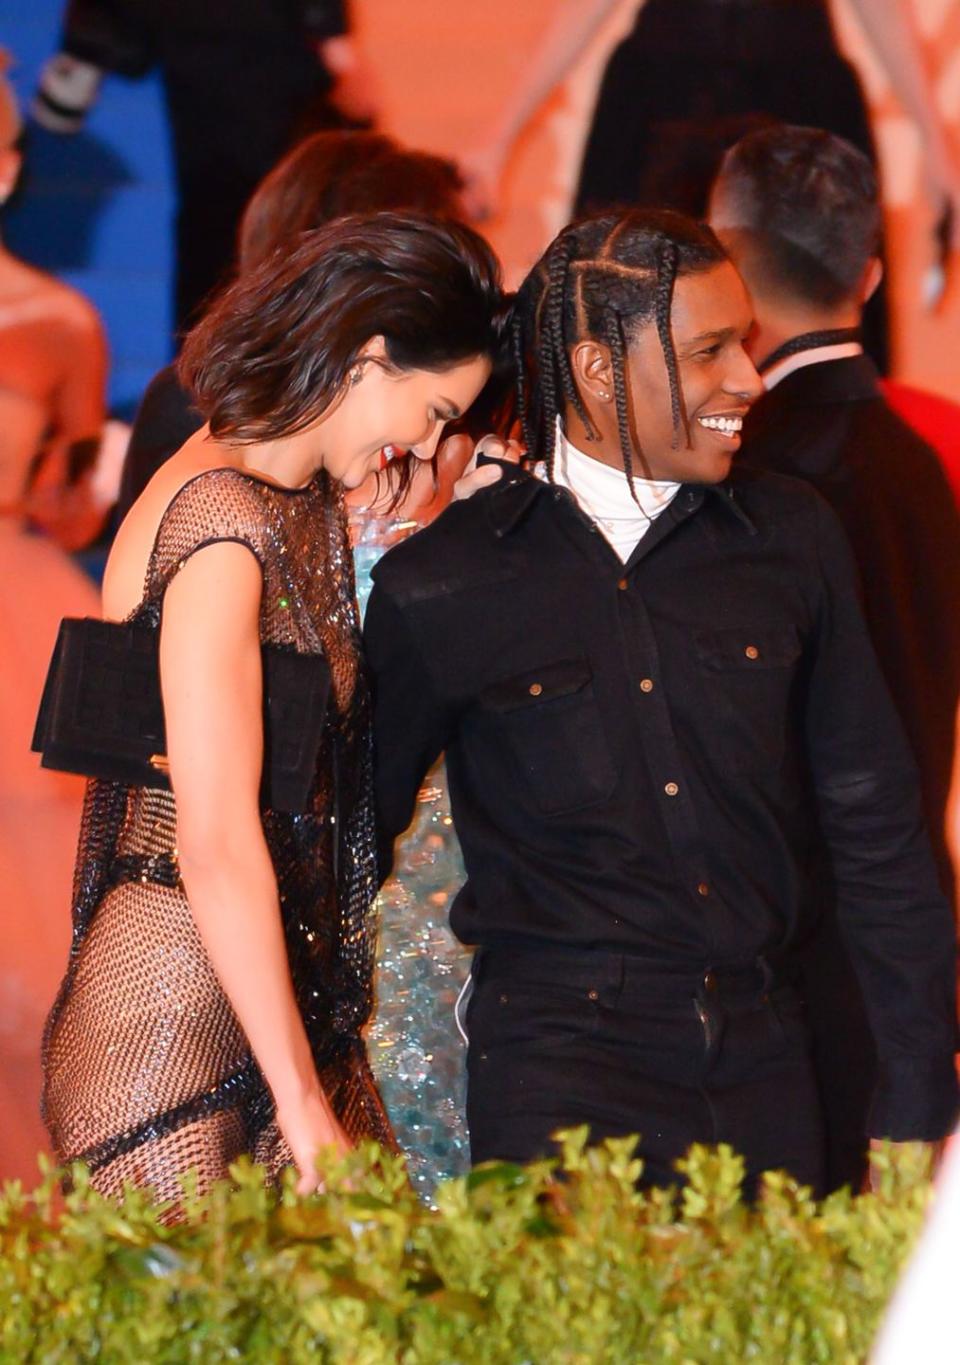 new york, ny may 01 kendell jenner and asap rocky attend rei kawakubocomme des garcons art of the in between at metropolitan museum of art on may 1, 2017 in new york city photo by raymond hallgc images